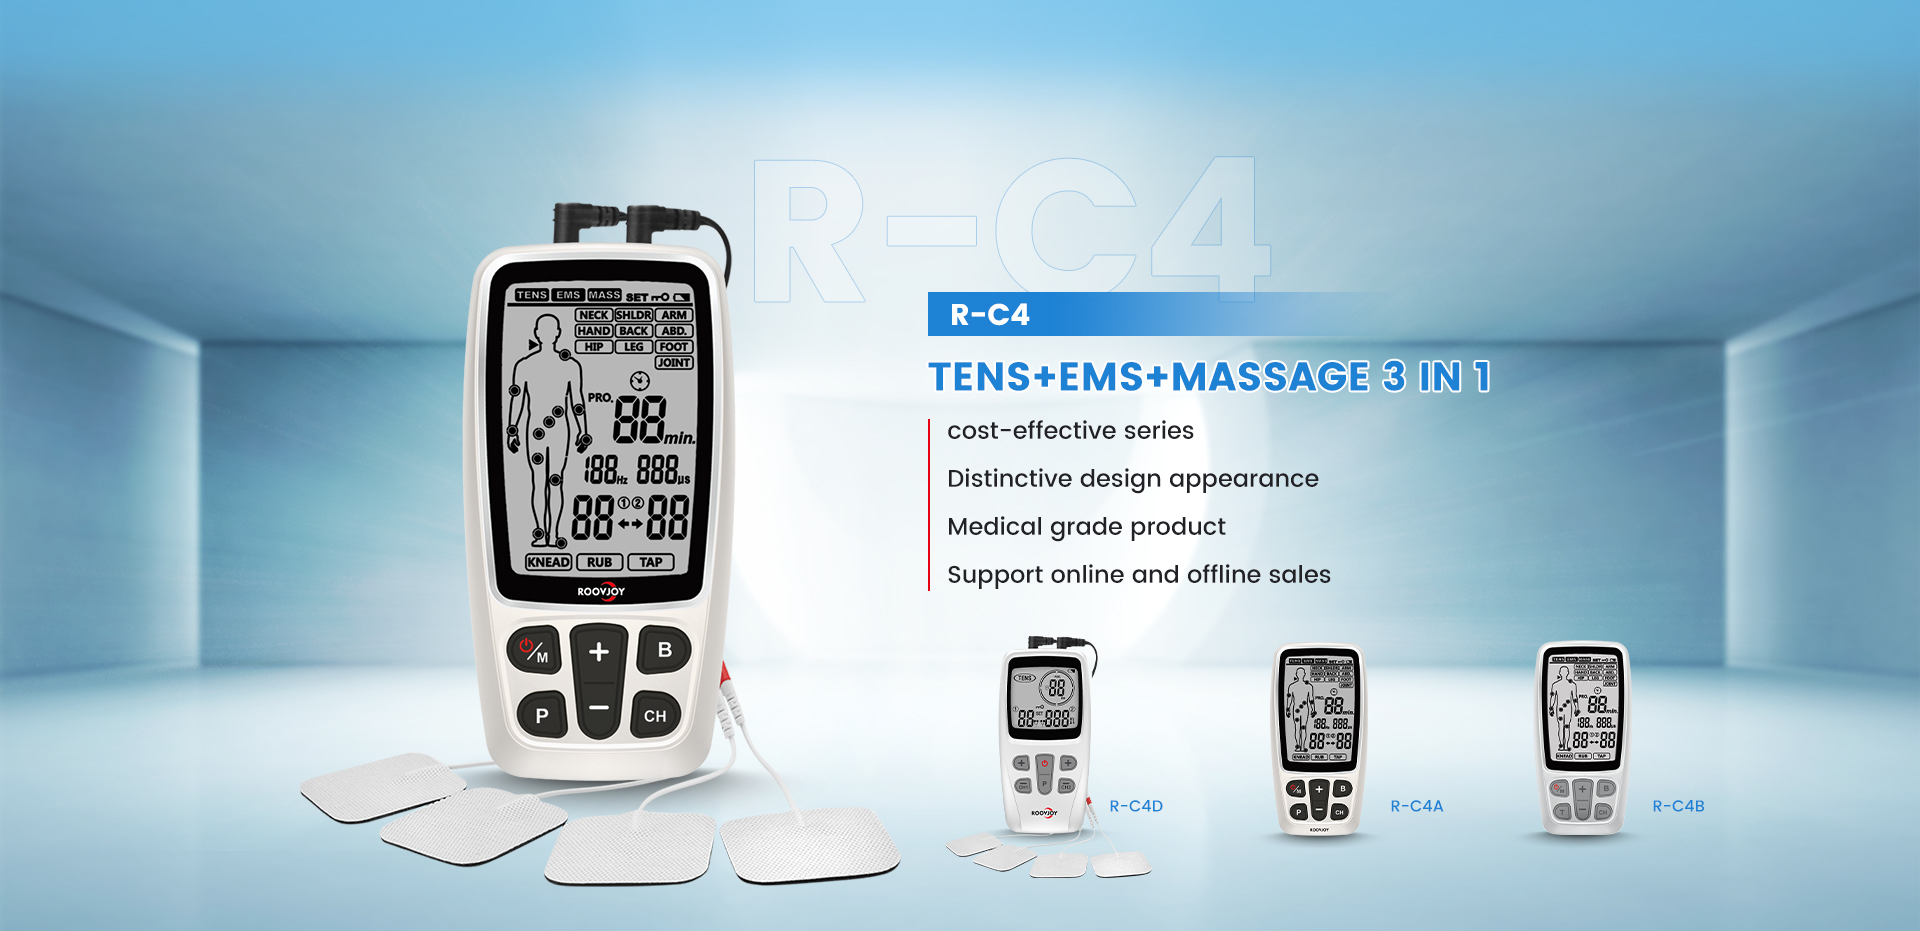 R-C4A：Comprehensive 3 in1 machine with TENS+EMS+MASSAGE 